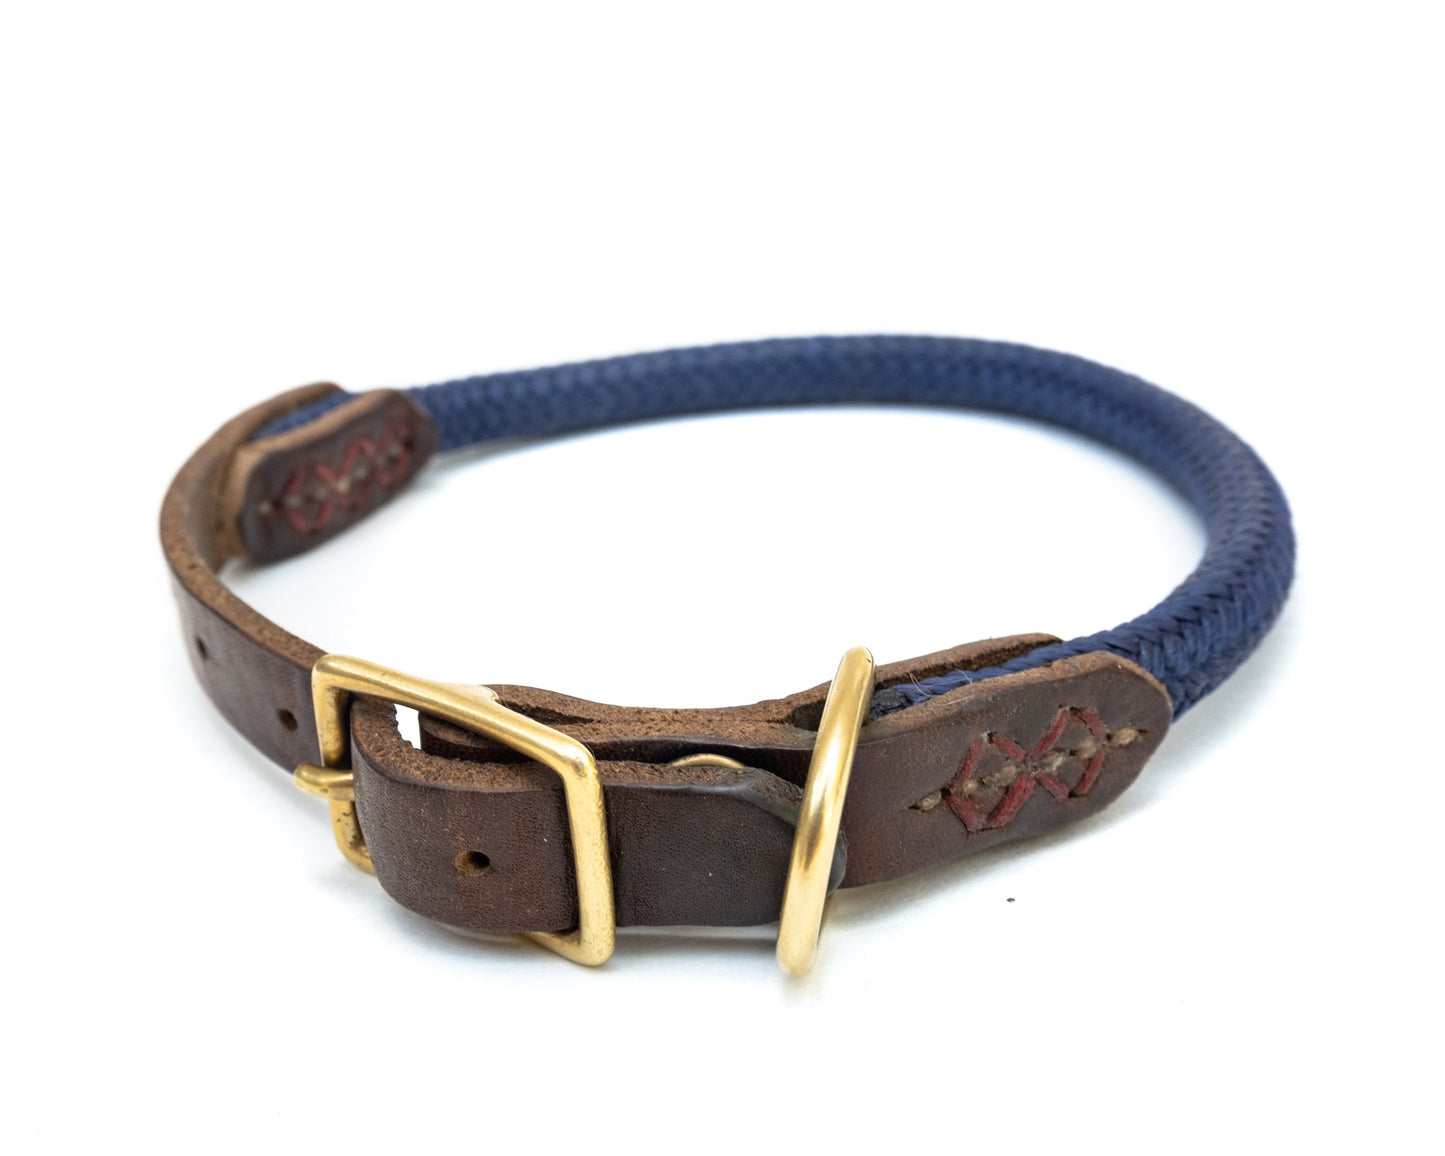 The Daily Adventure Collar